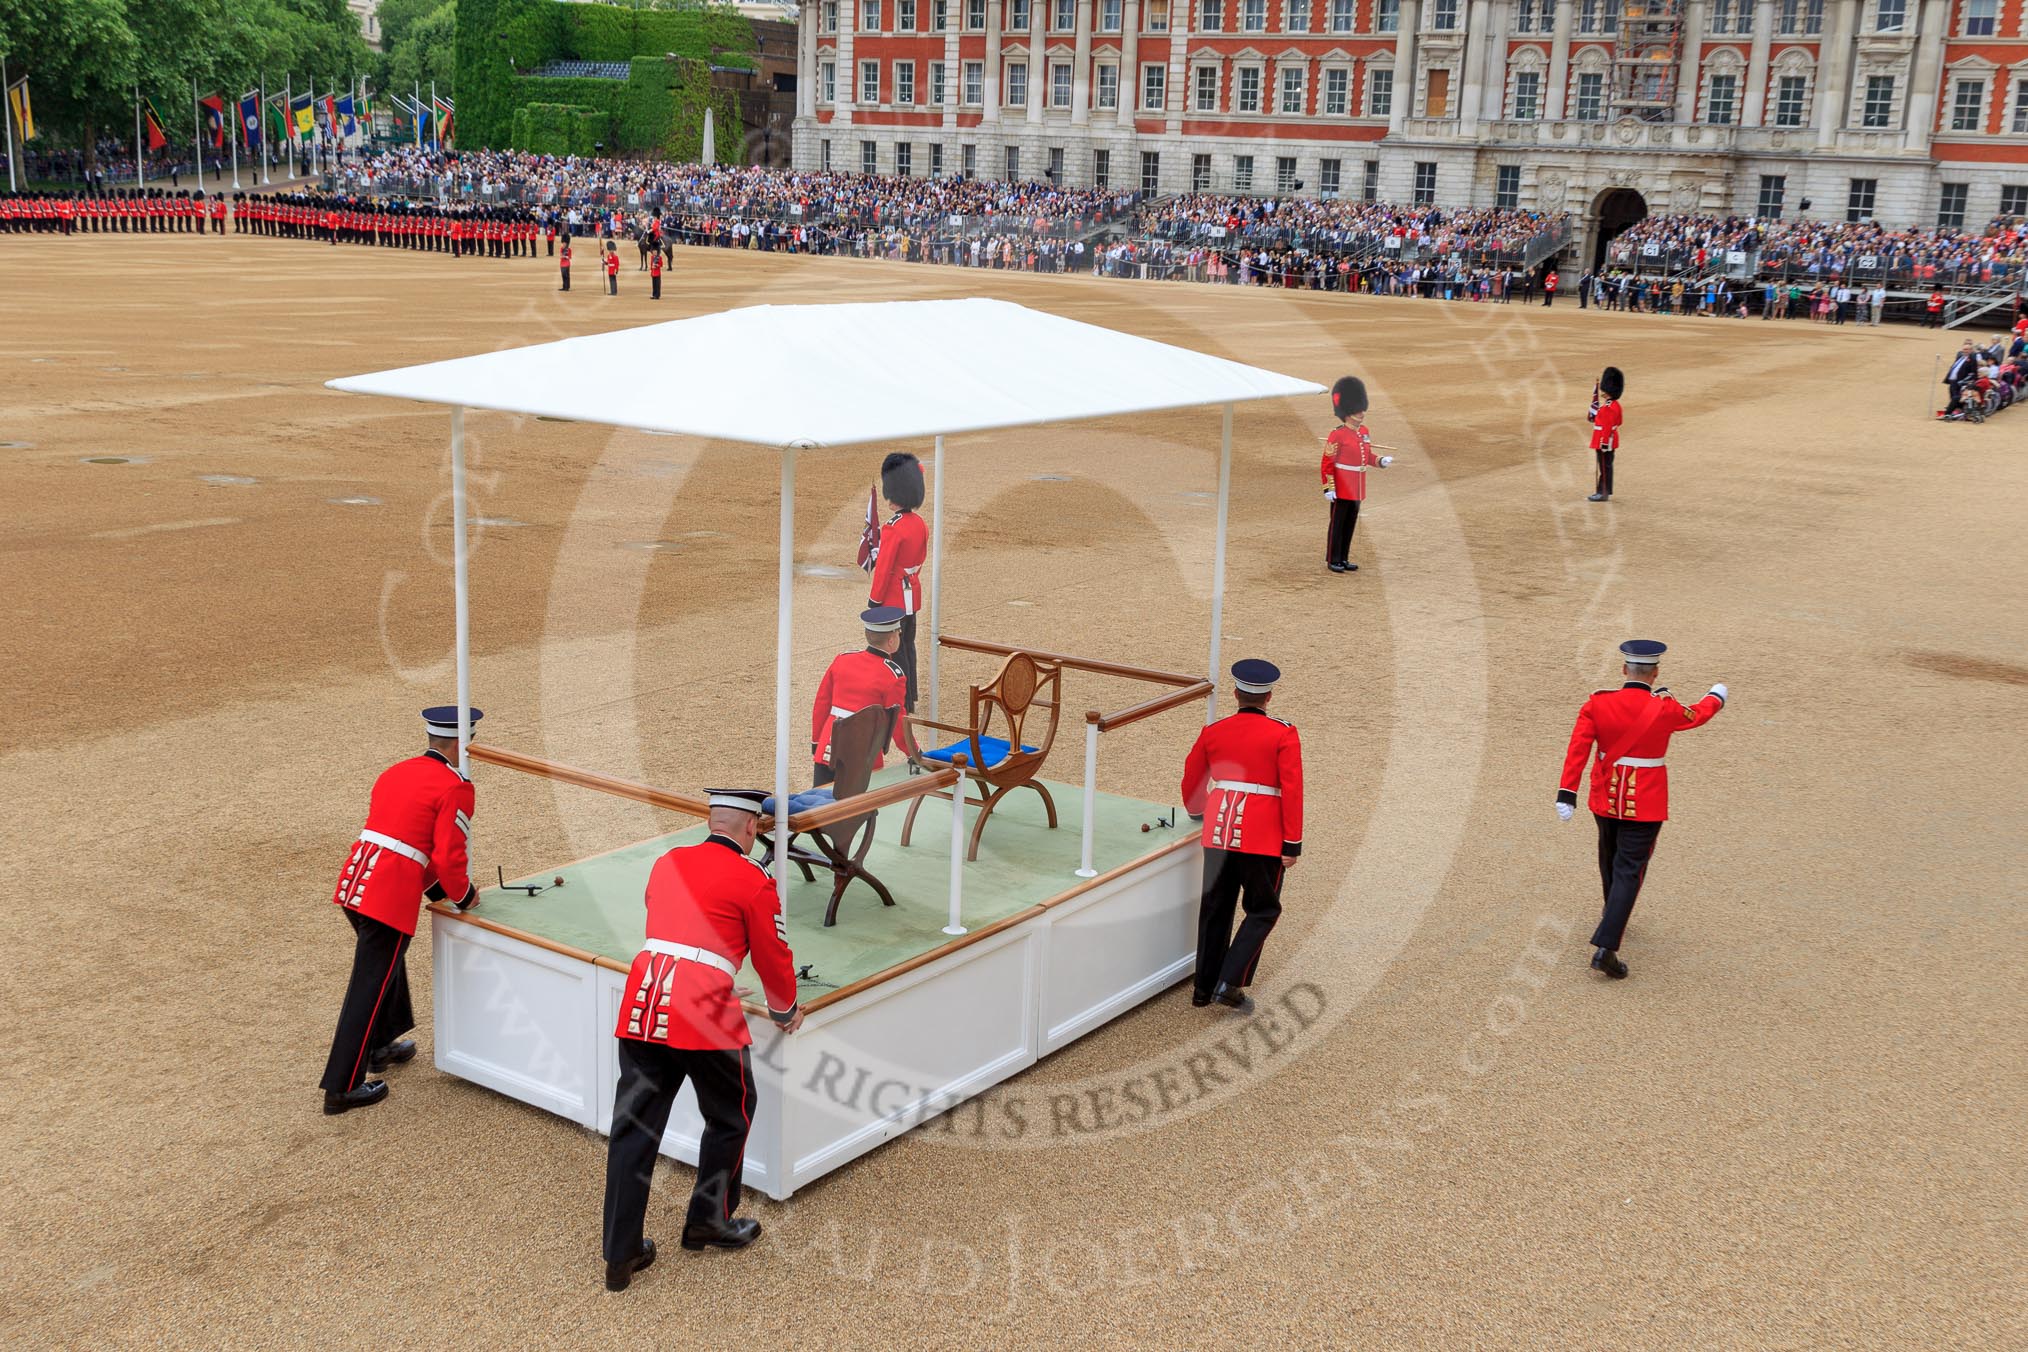 during The Colonel's Review {iptcyear4} (final rehearsal for Trooping the Colour, The Queen's Birthday Parade)  at Horse Guards Parade, Westminster, London, 2 June 2018, 10:51.